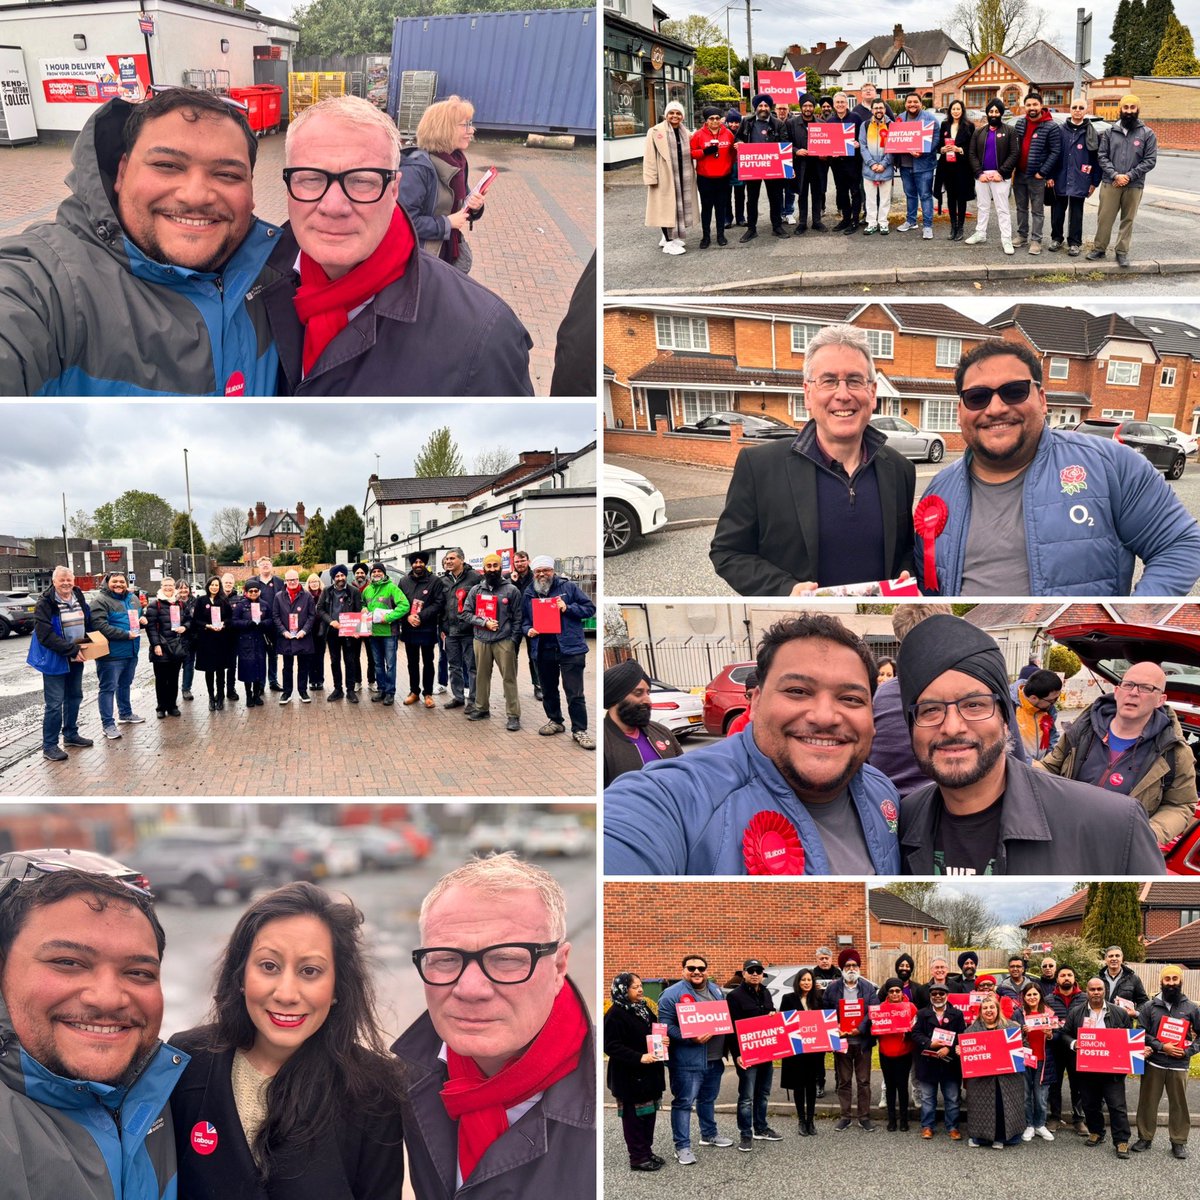 @sikhs4labour sunday tour of Dudley, Sandwell & Wolverhampton. Really positive conversations on the doorsteps with @RichParkerLab & @SimonFosterPCC. And on this Workers' Memorial Day sharing our plans for... A New Deal For Working People which will make a massive difference.